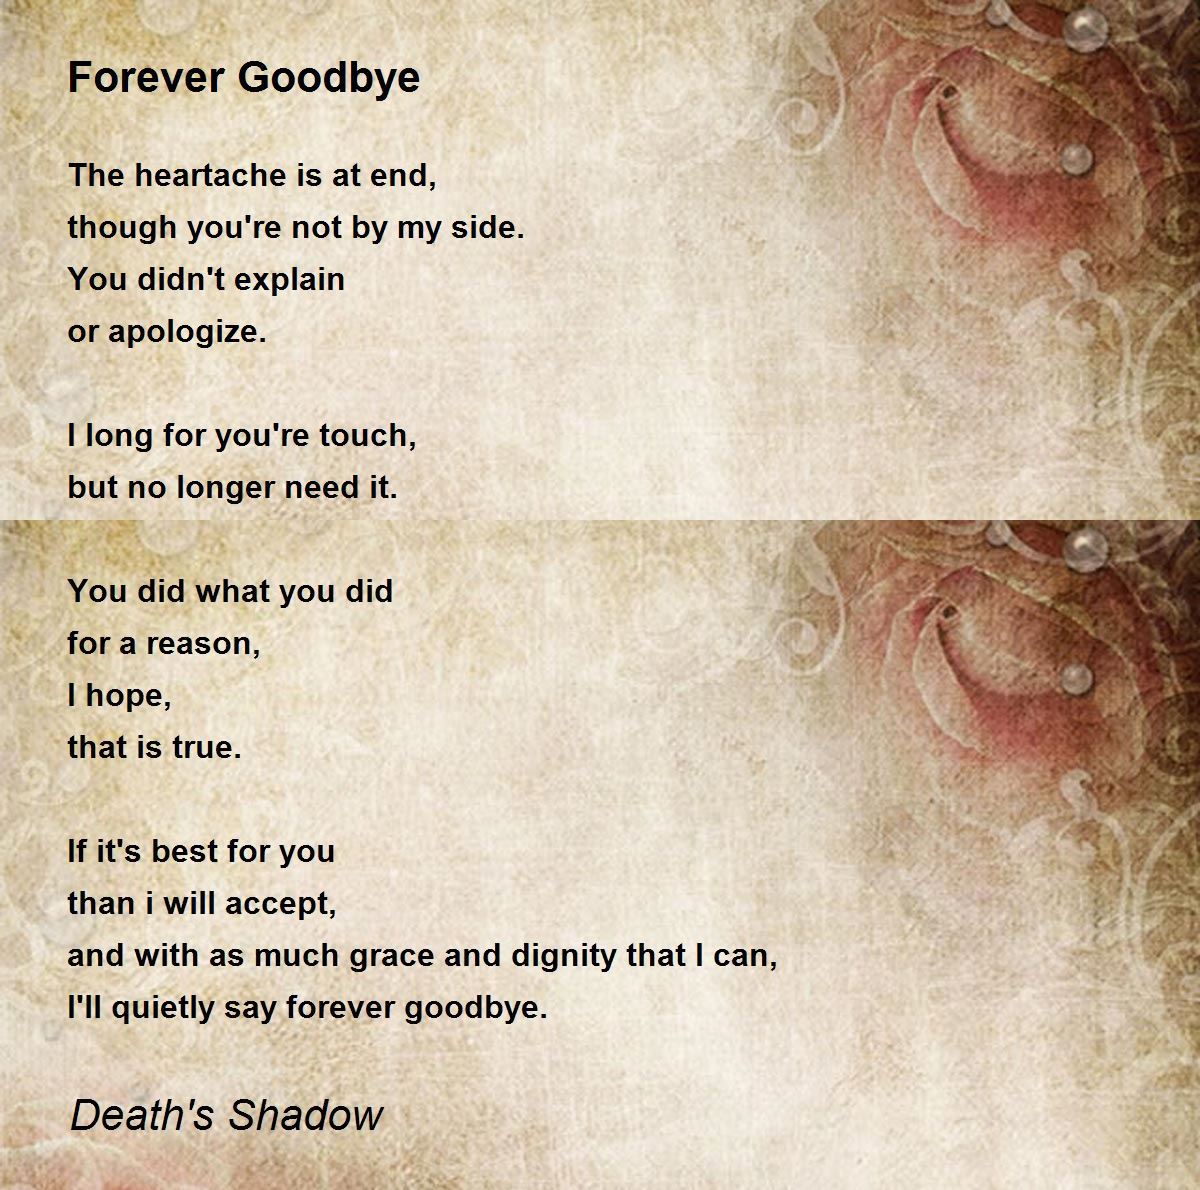 Forever Goodbye - Forever Goodbye Poem by Death's Shadow